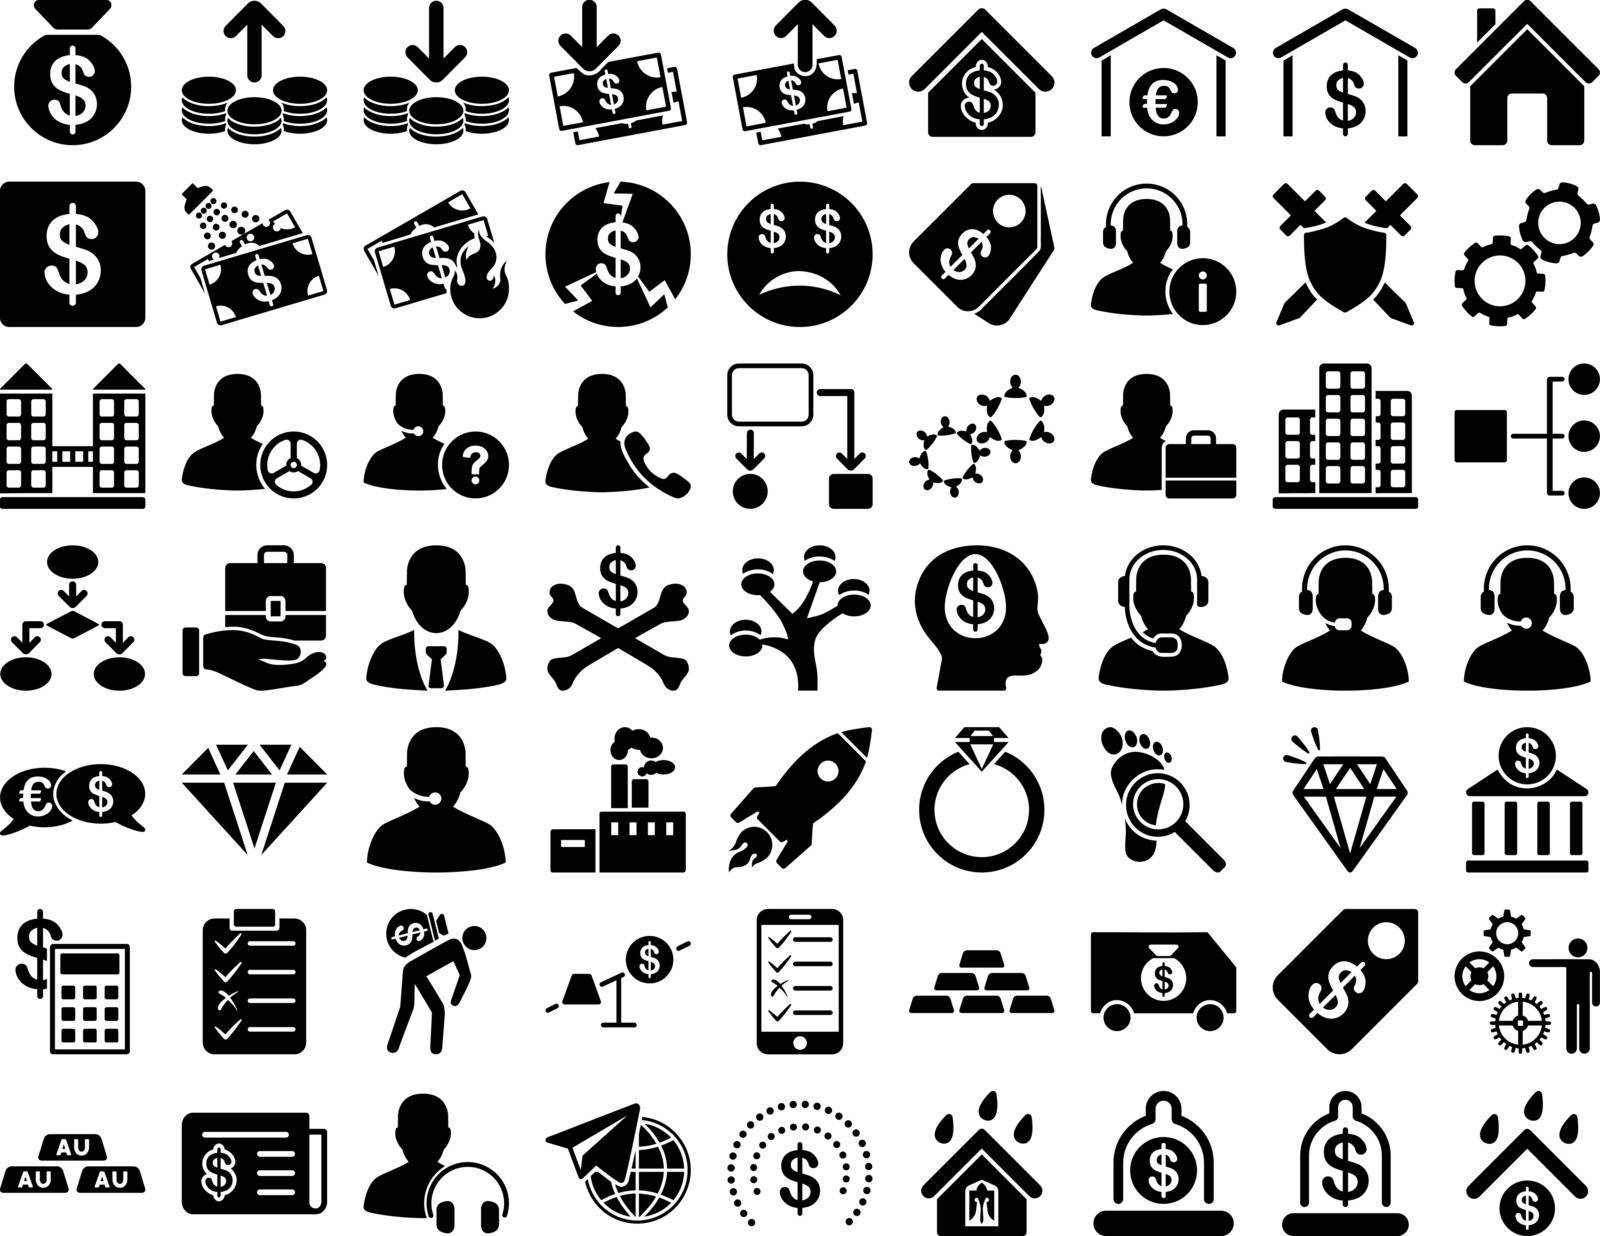 Commerce Icons. These flat icons use black color. Vector images are isolated on a white background.